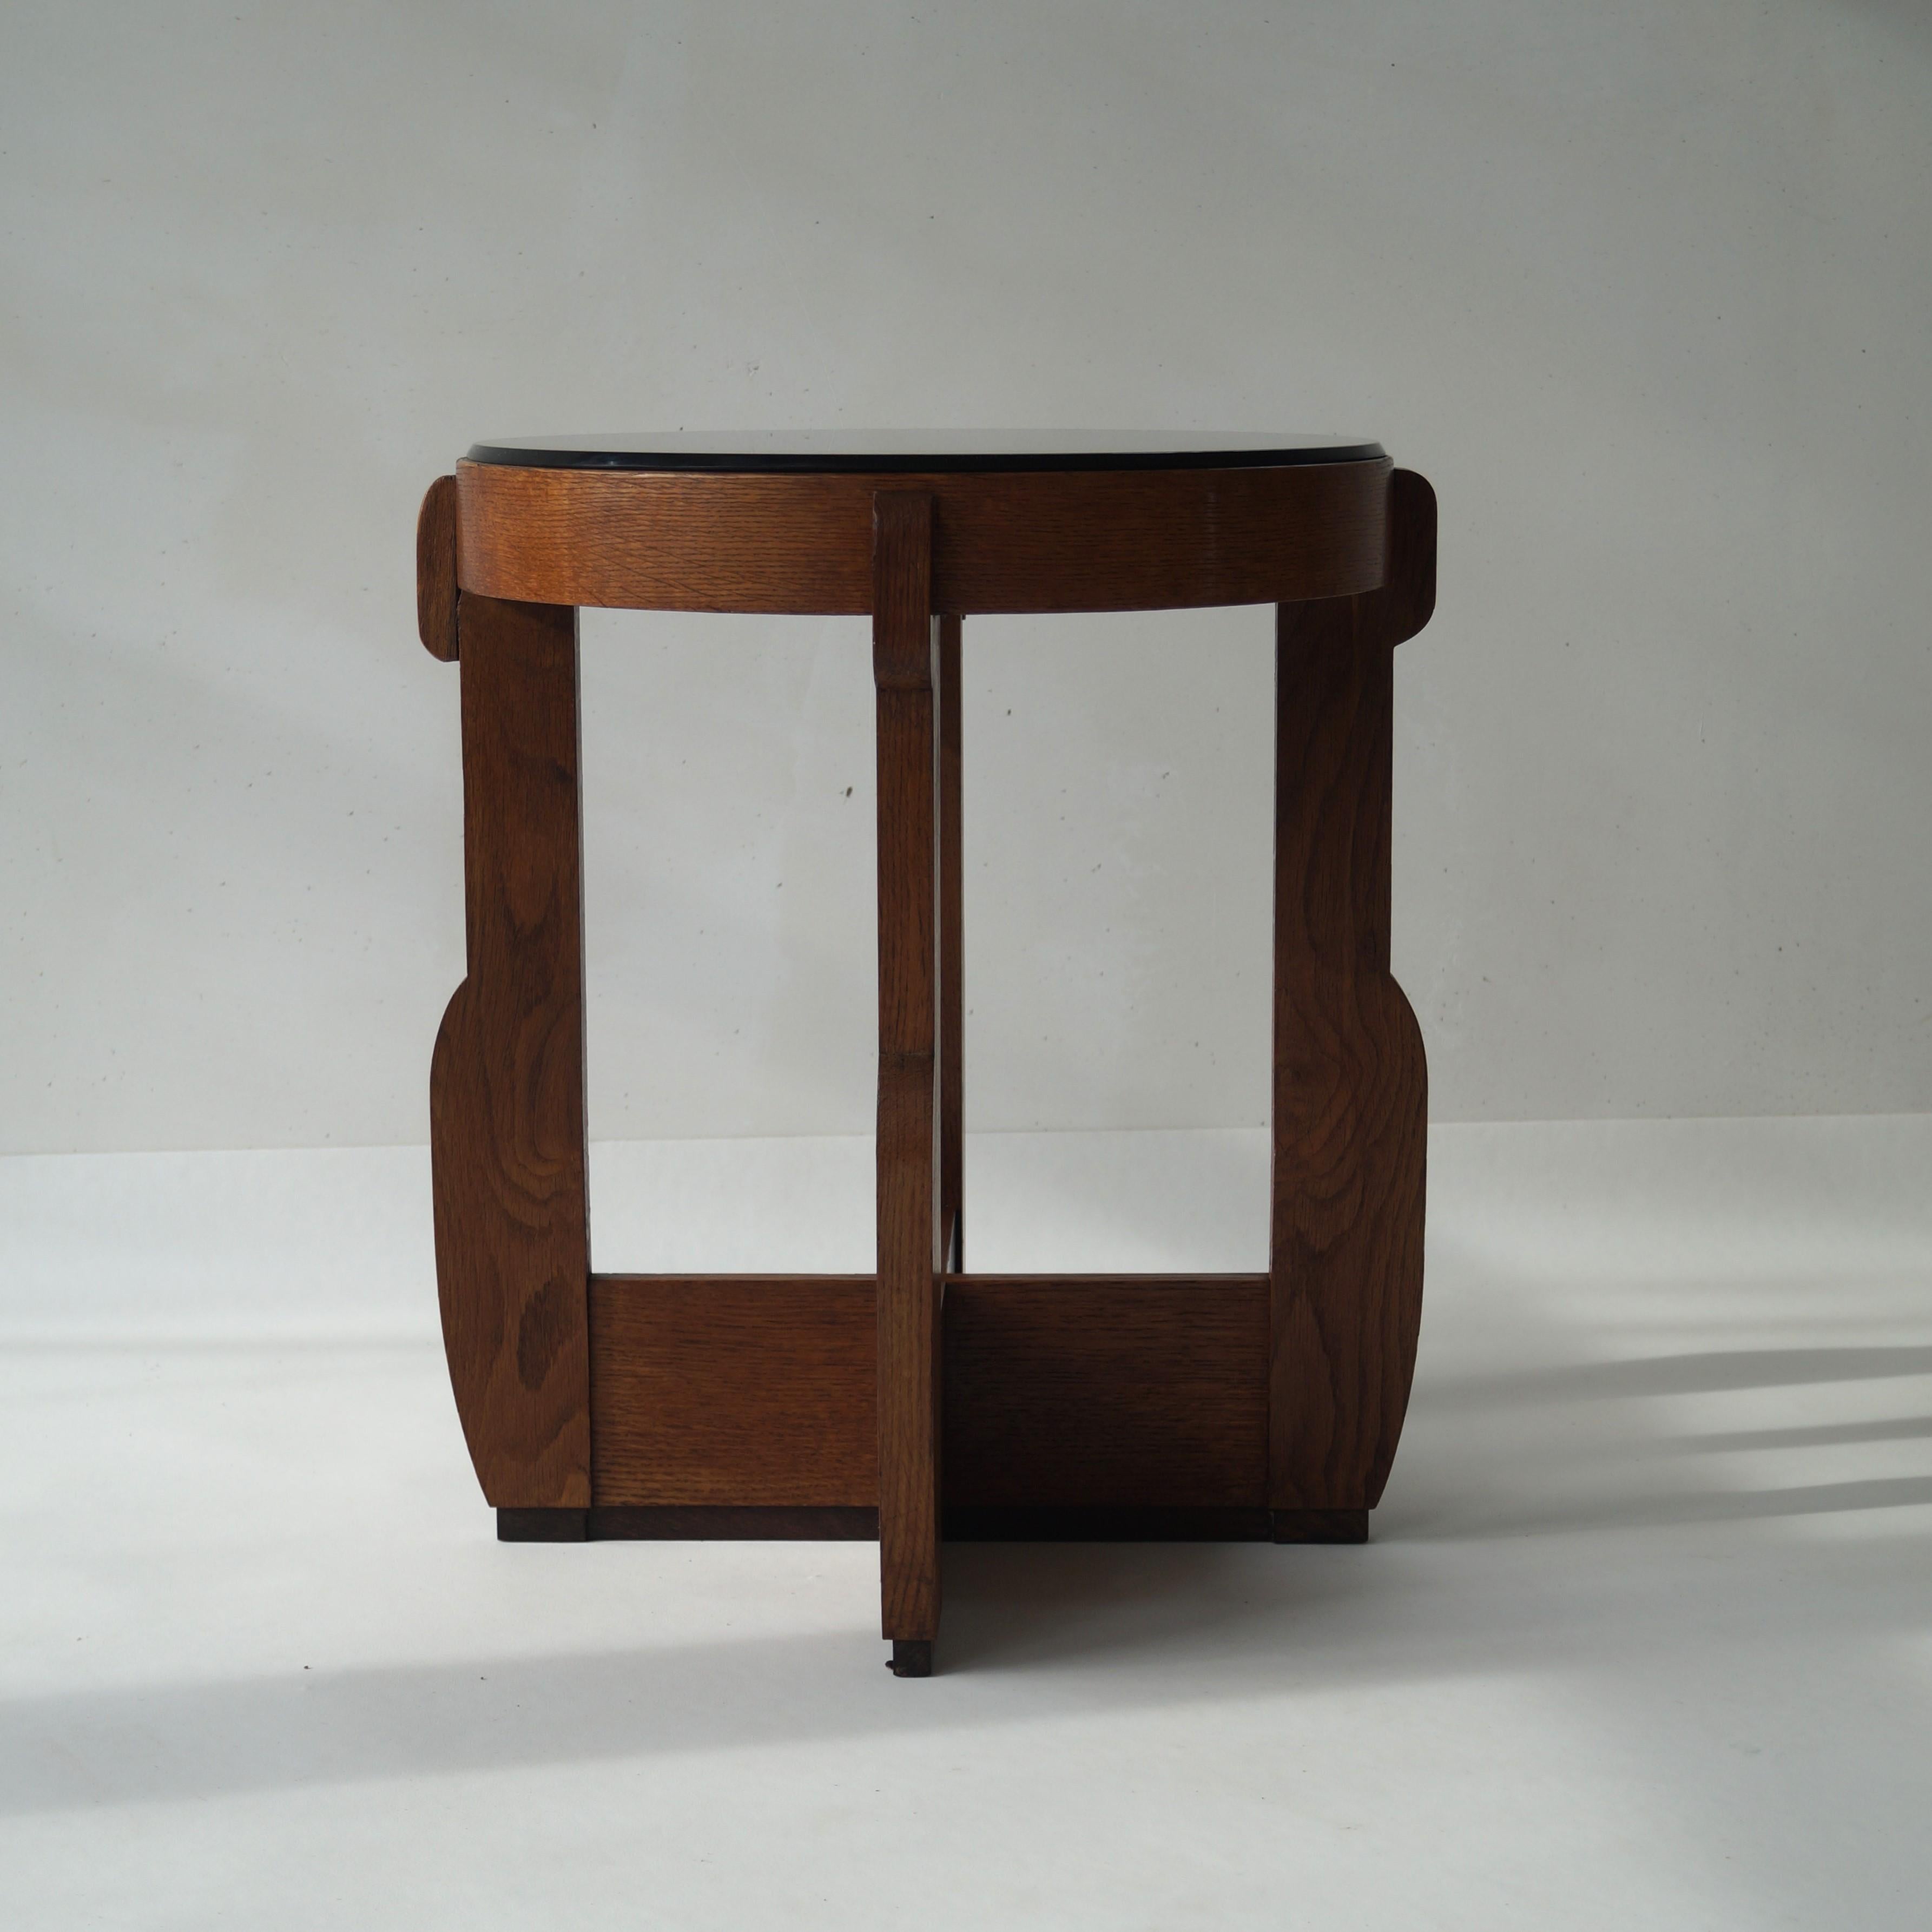 Mid-20th Century Dutch Art Deco Haagse School Occasional Table, 1930s